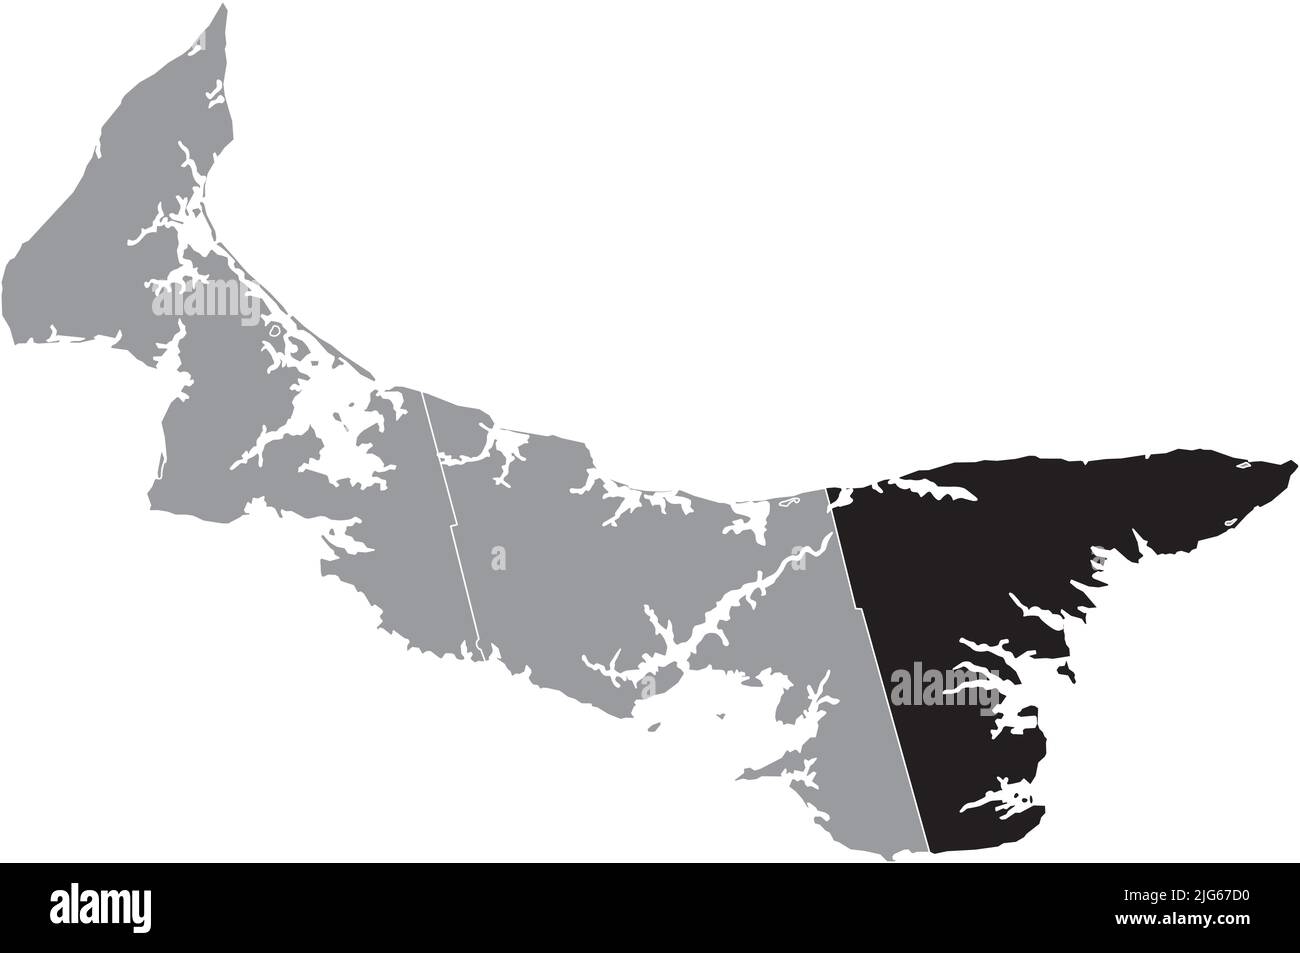 Black flat blank highlighted location map of the KINGS COUNTY inside gray administrative map of counties of Canadian province of Prince Edward Island, Stock Vector